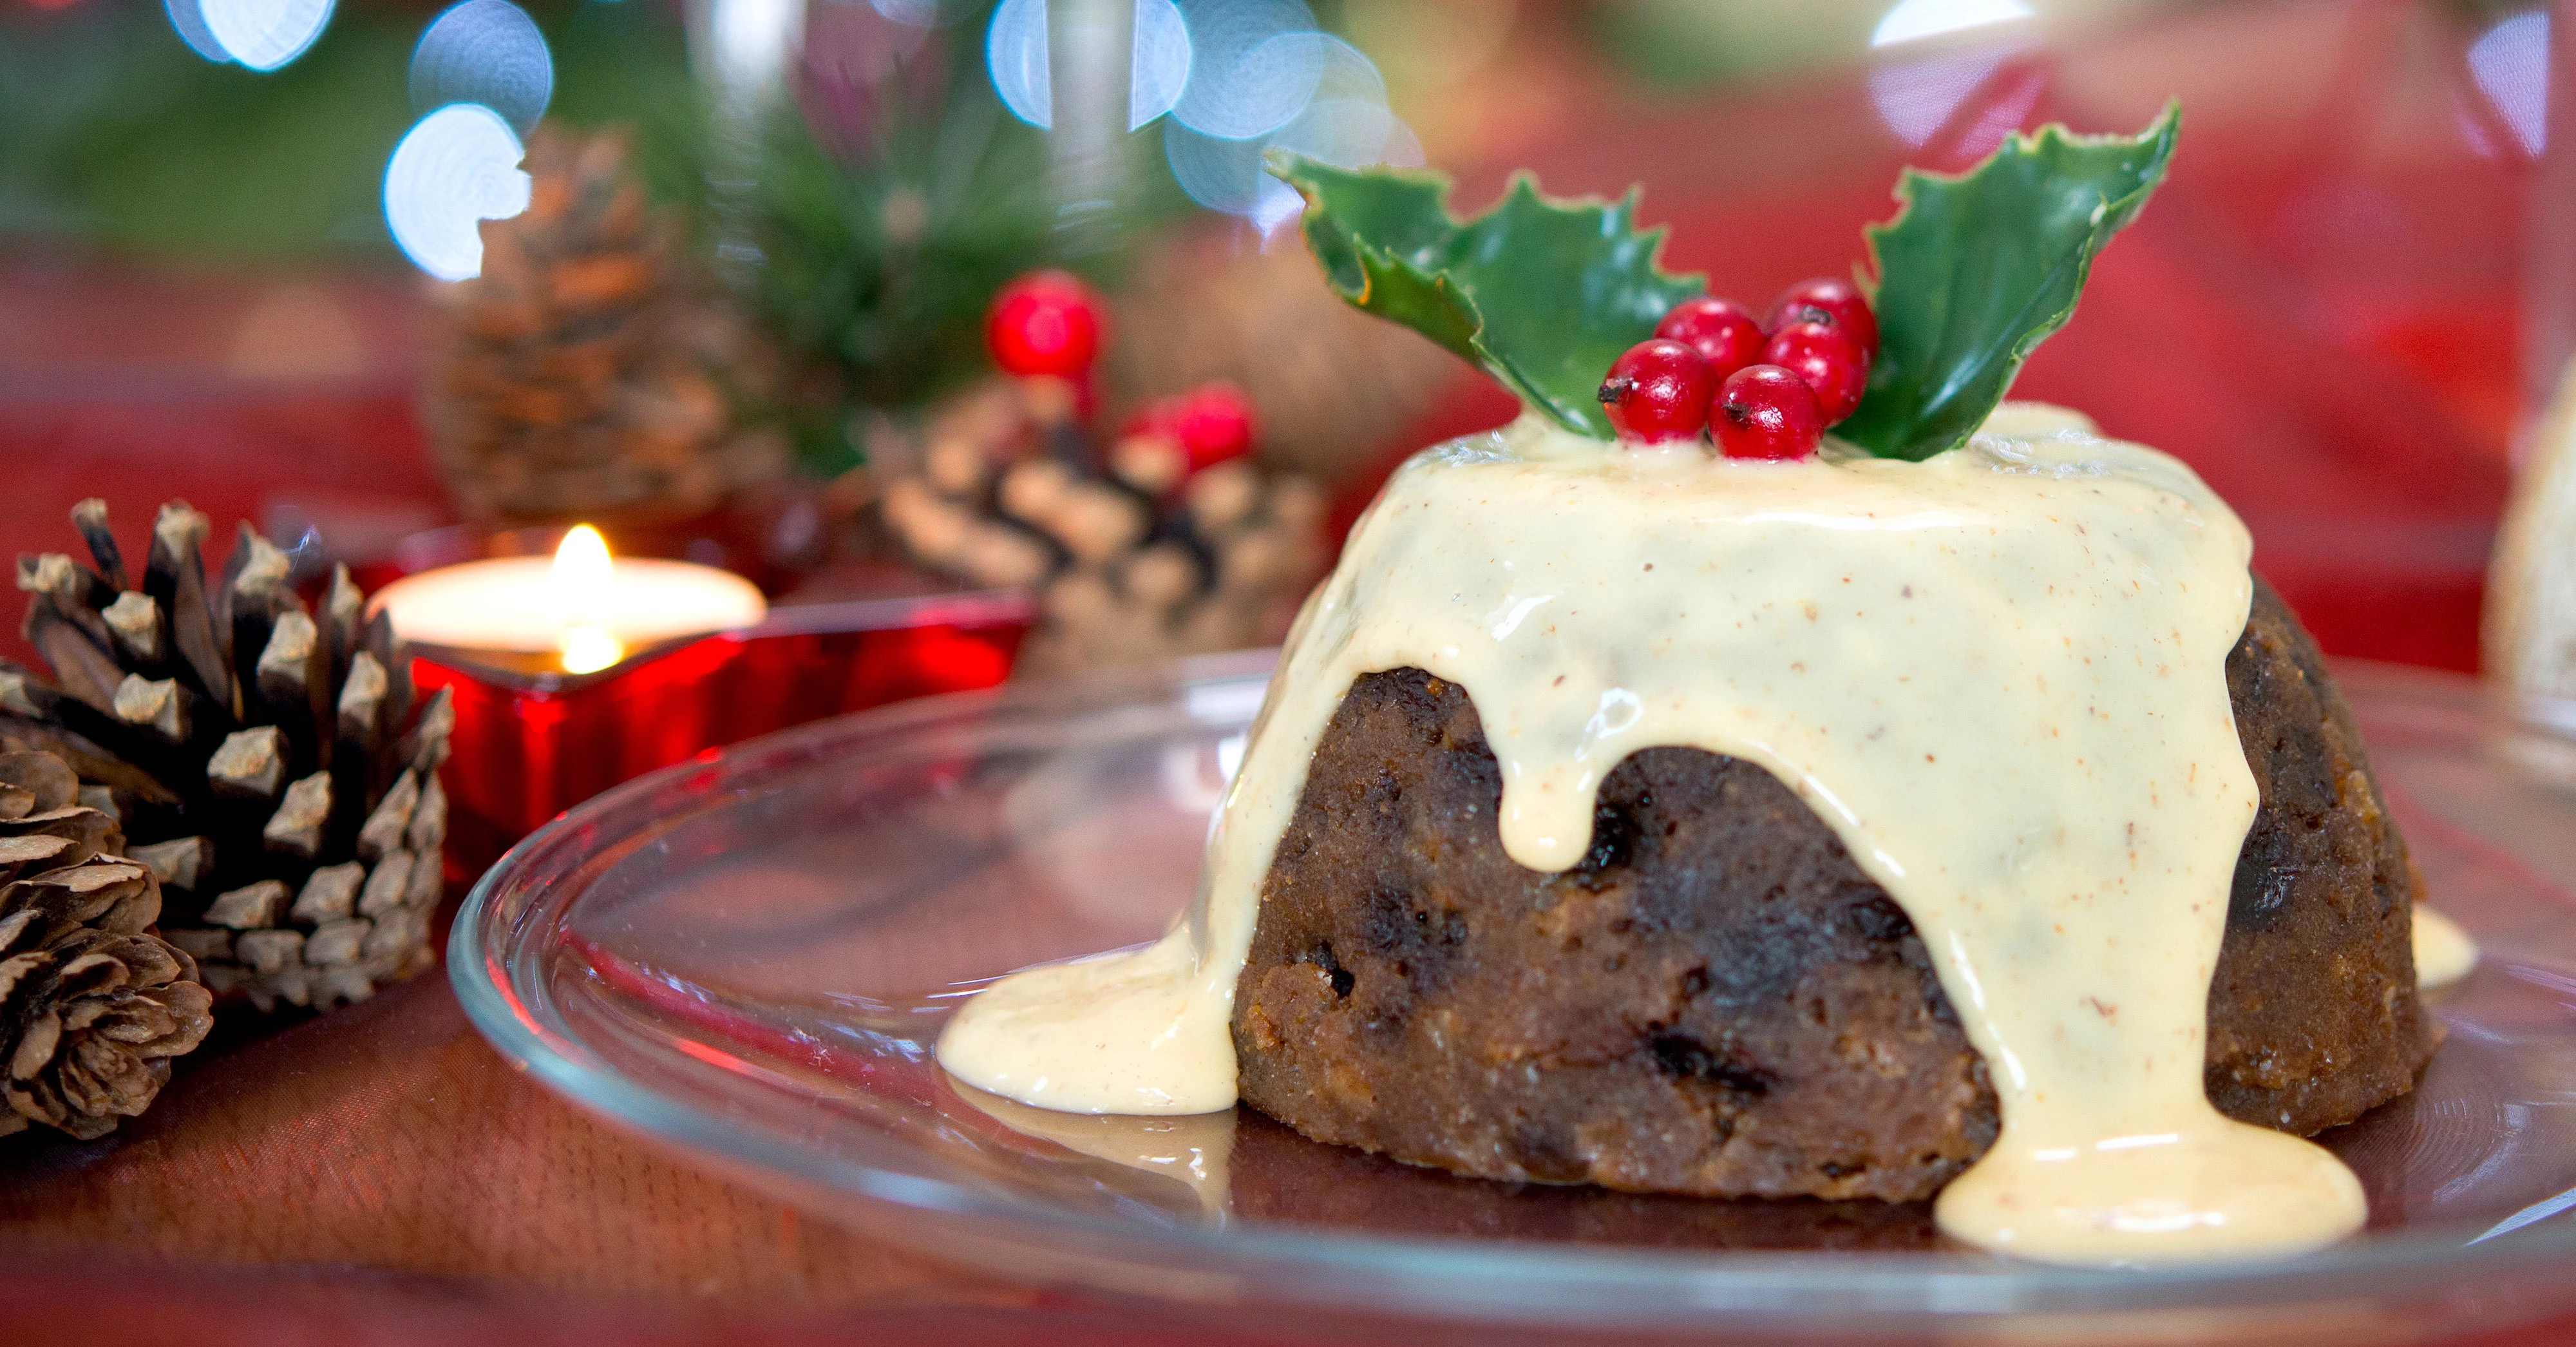 Making delicious traditional Christmas pudding without oven